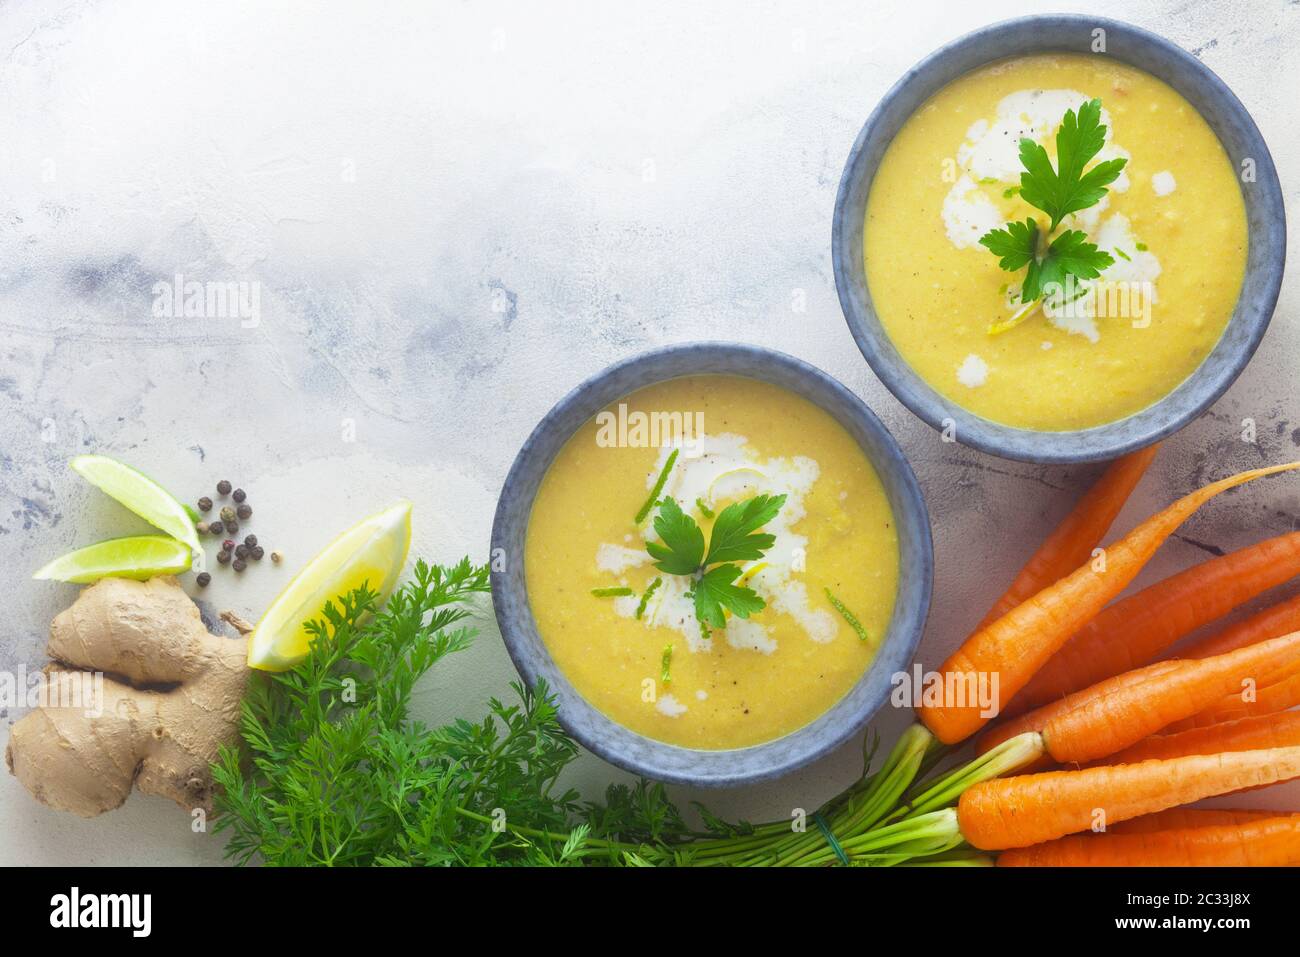 Two Bowls Of Carrot Soup With Ingredients Stock Photo